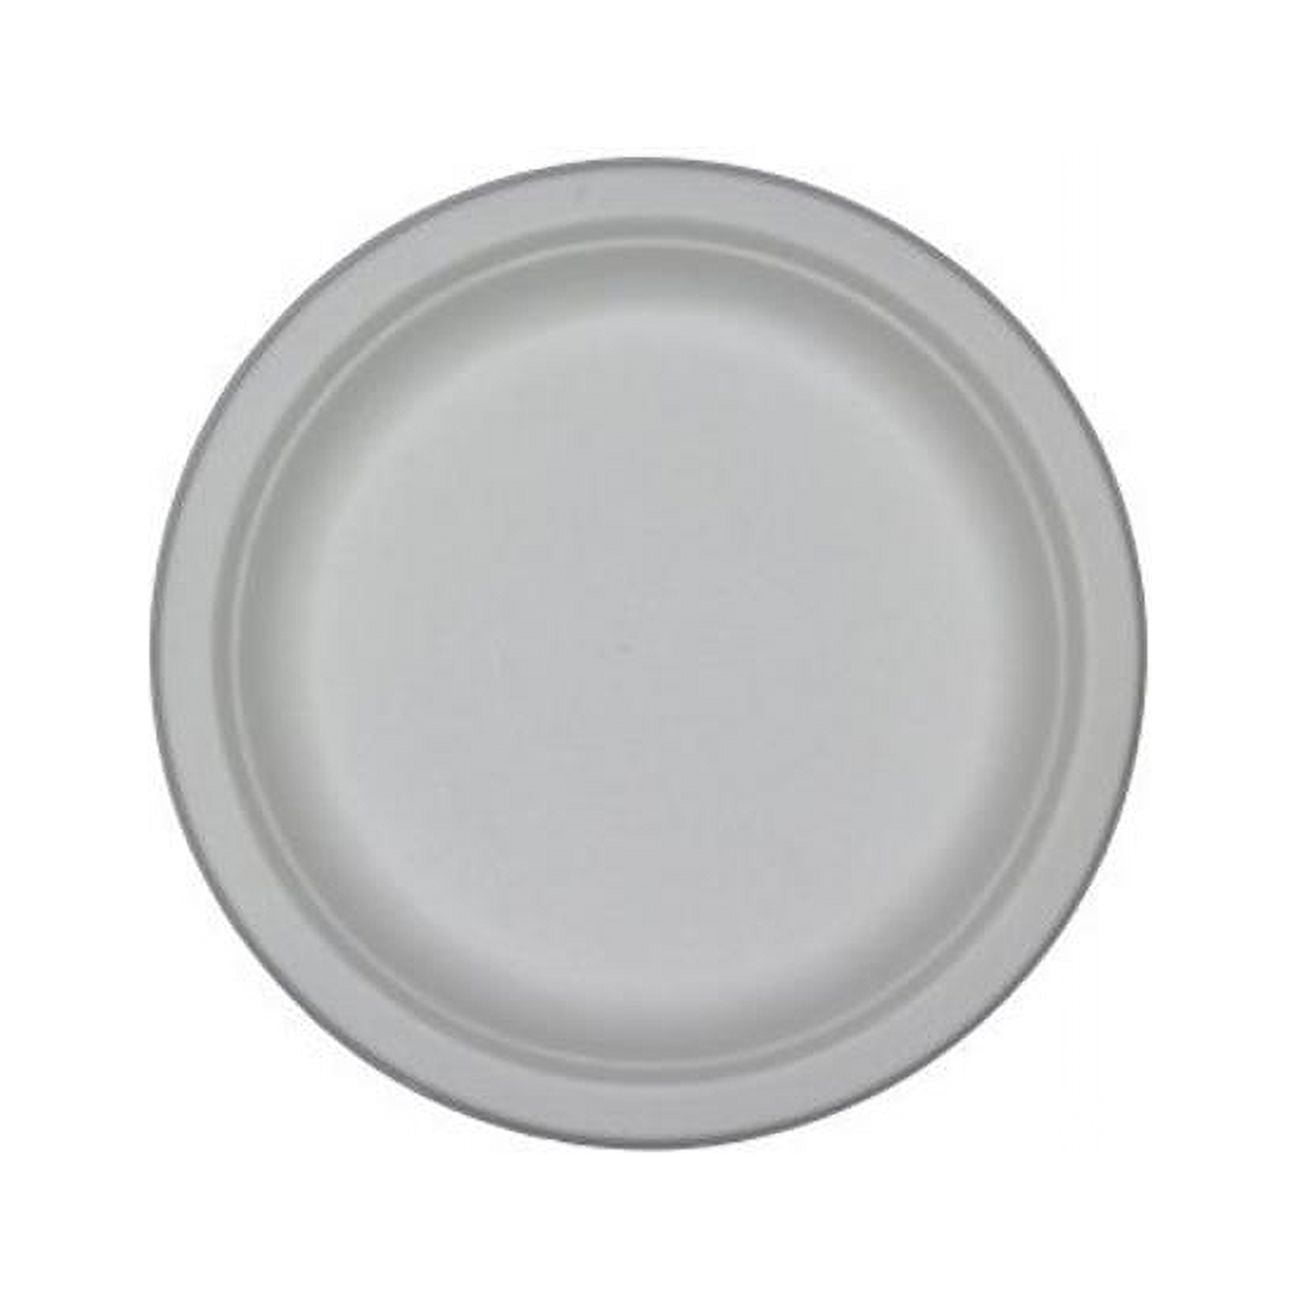 00% Compostable 10 Inch Paper Plates [500-Pack] Disposable Party Plates